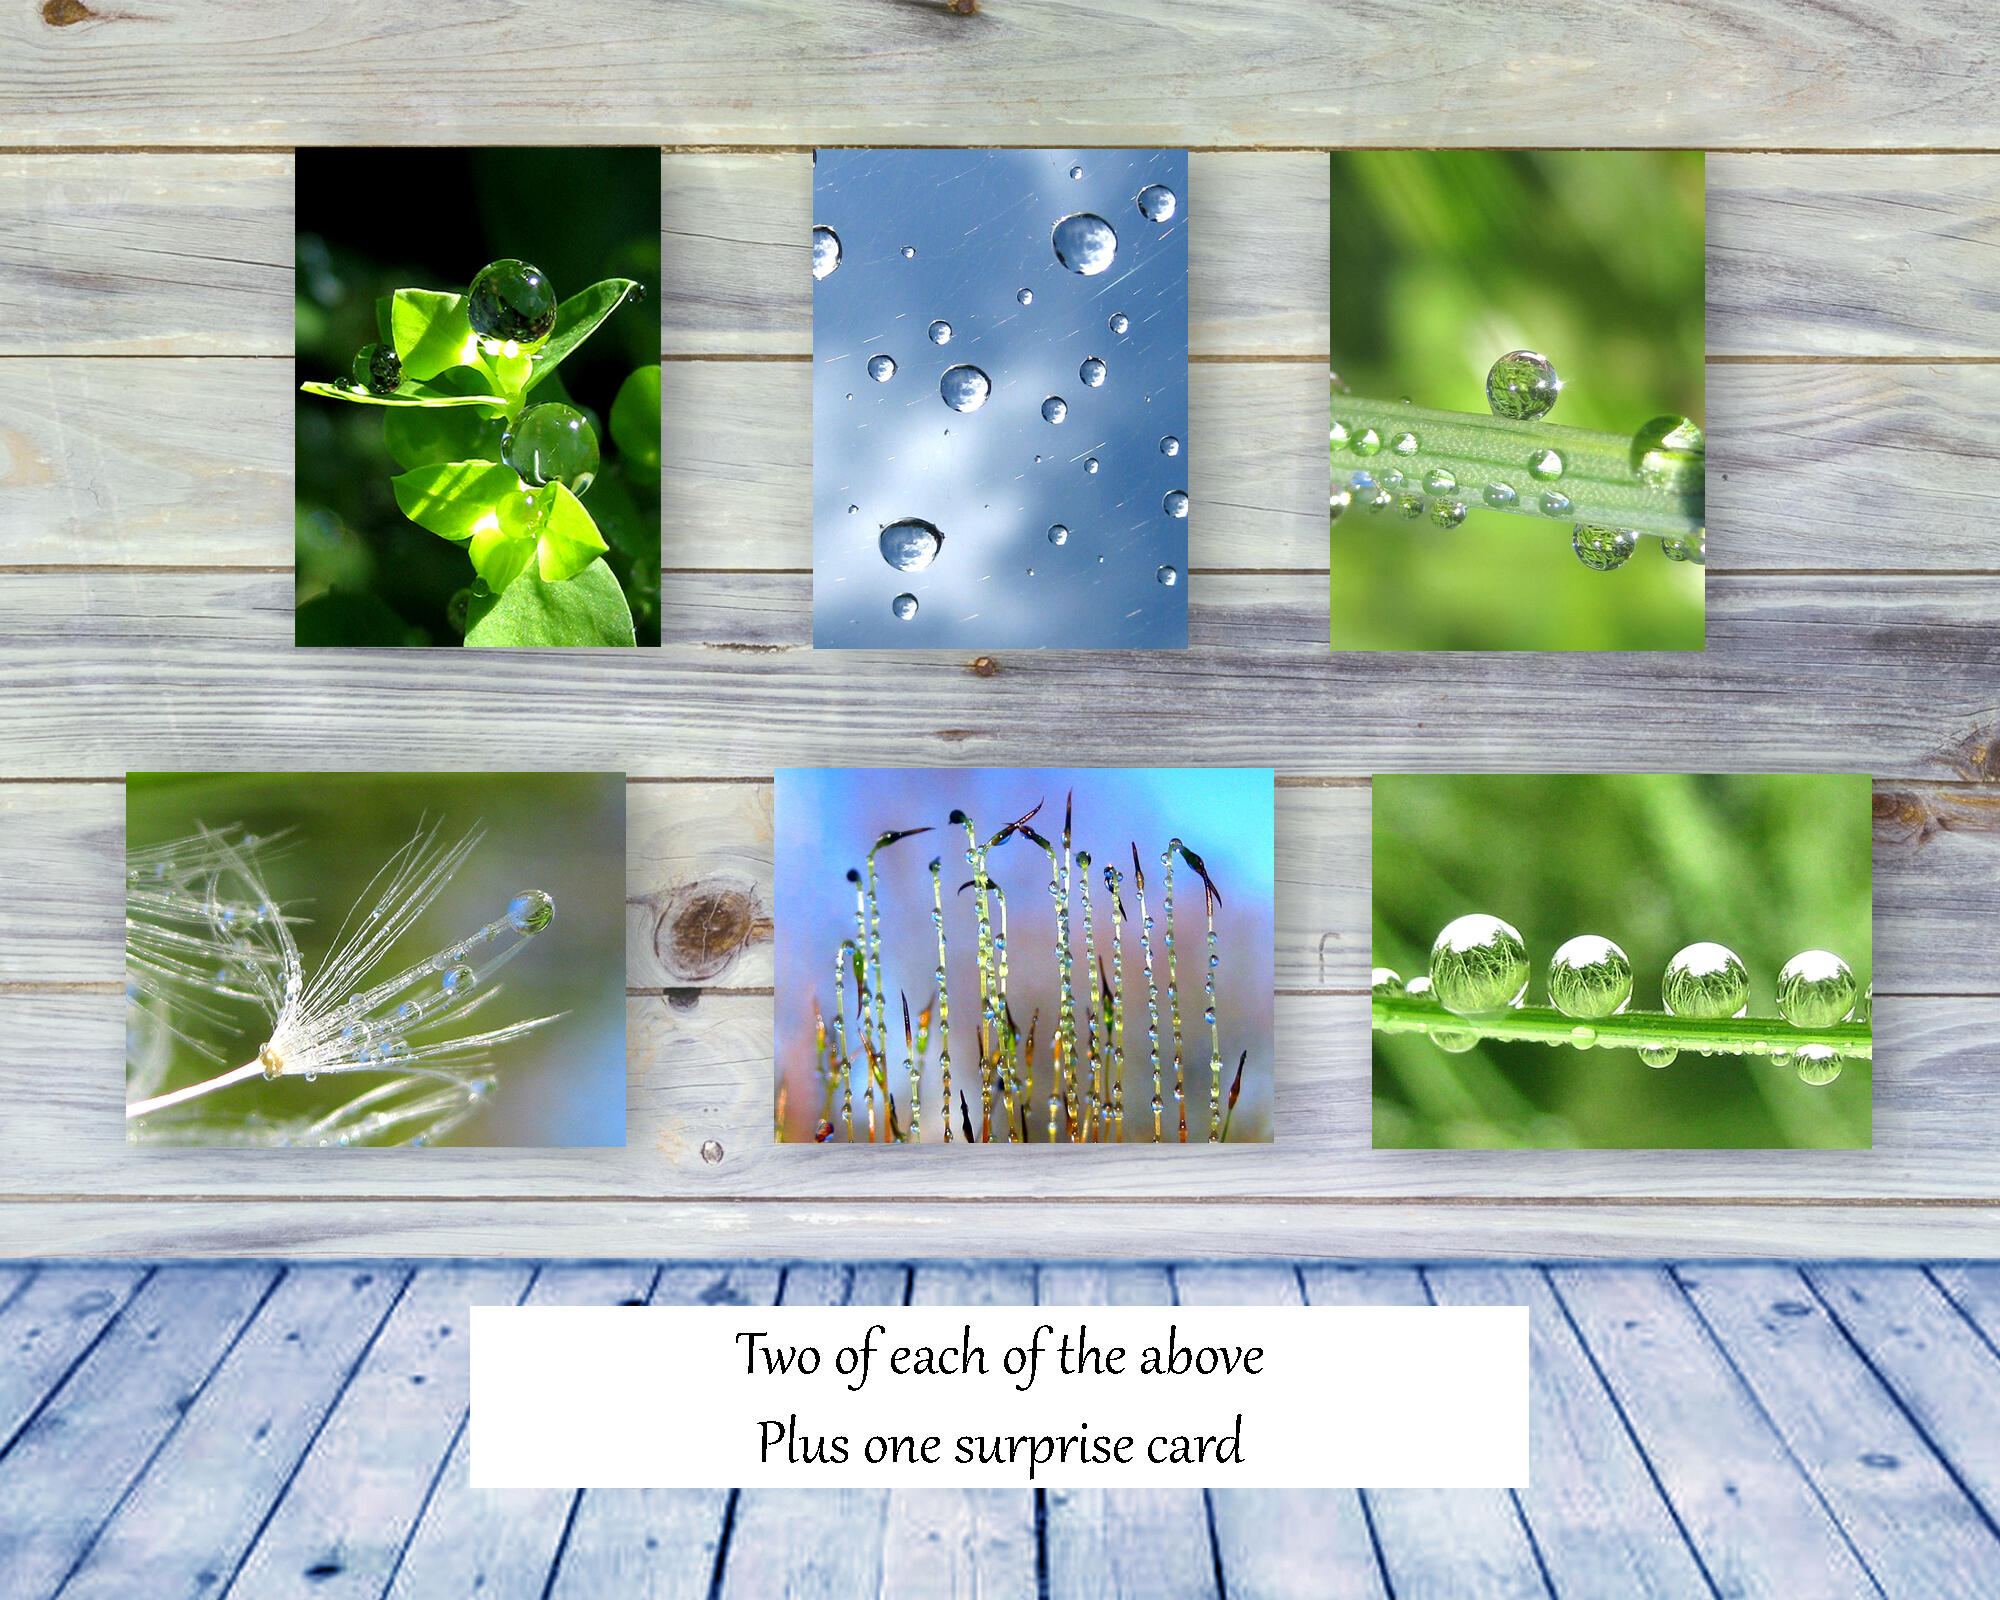 Meditation – Peaceful soothing, greeting card collection by The Poetry of Nature, Stories in nature photo cards with poems. Boxed Set Baker's Dozen